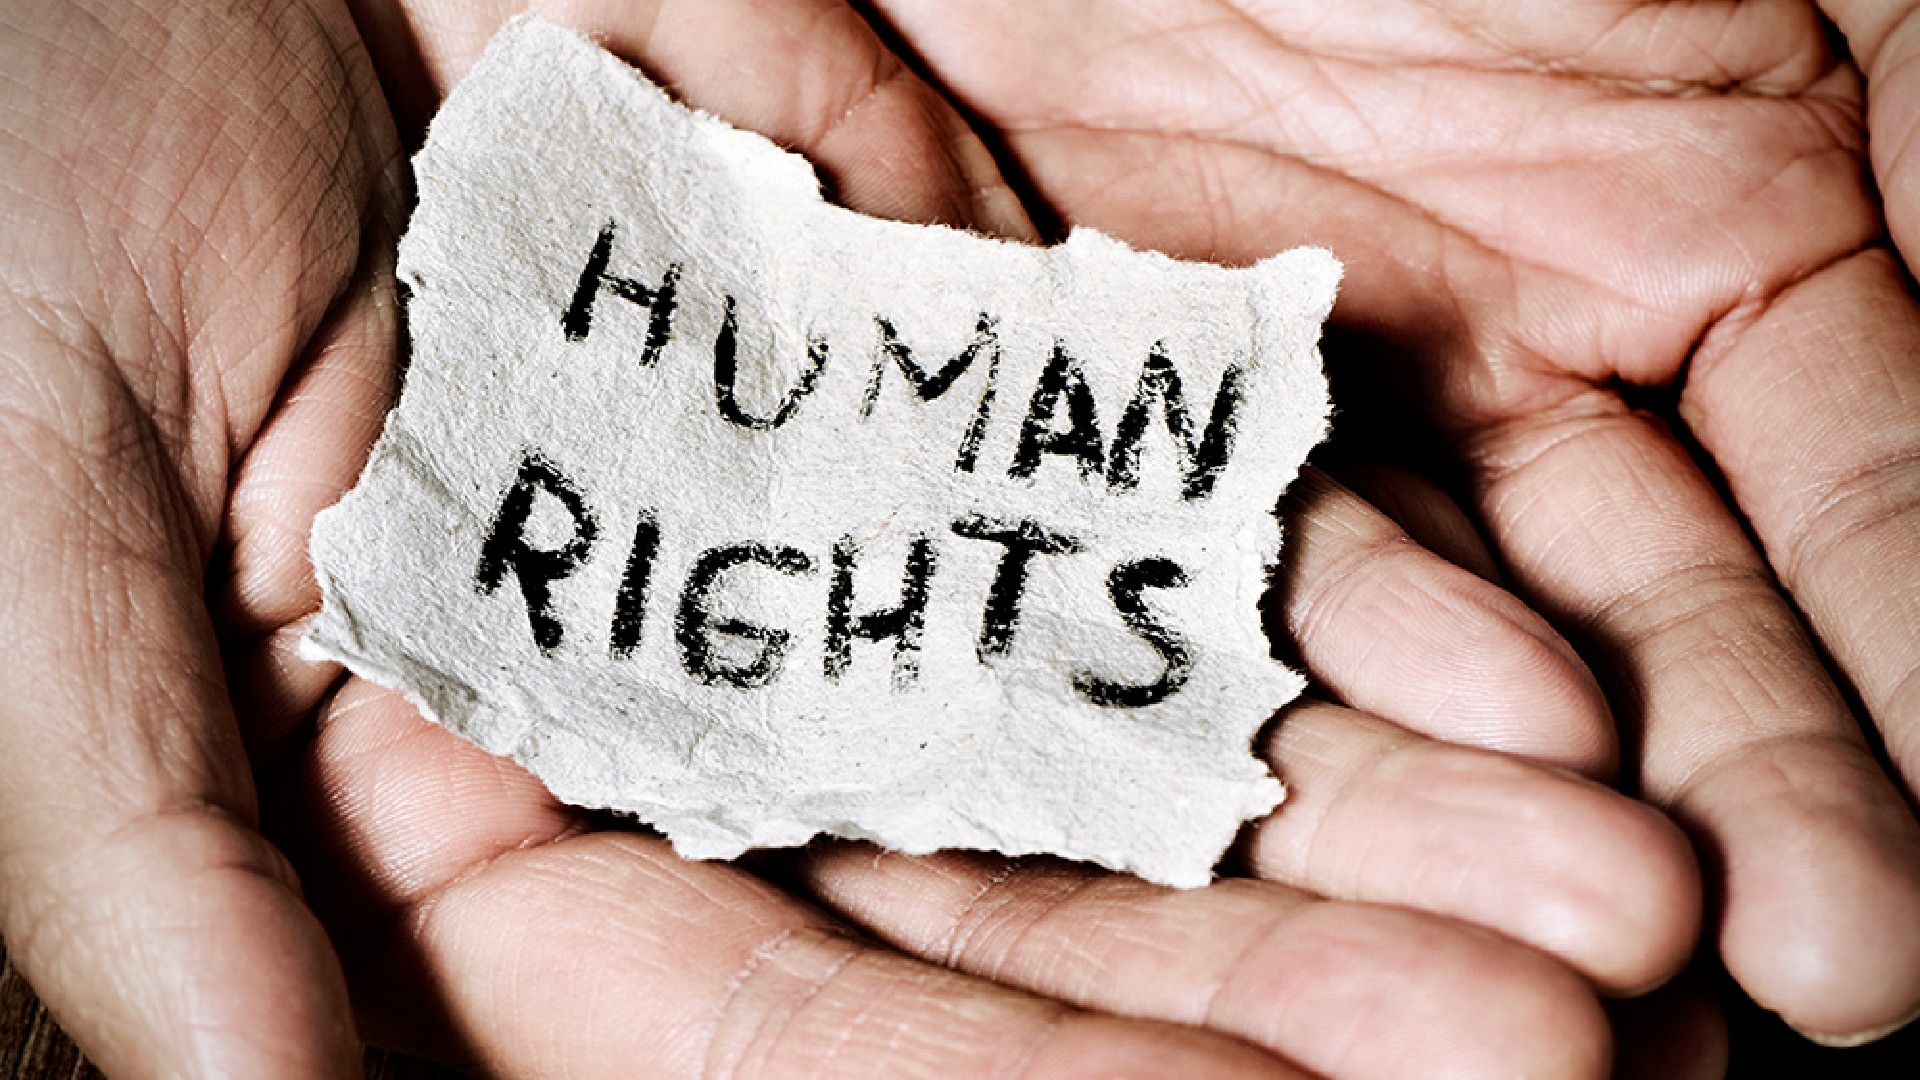 International Justice and Human Rights Research